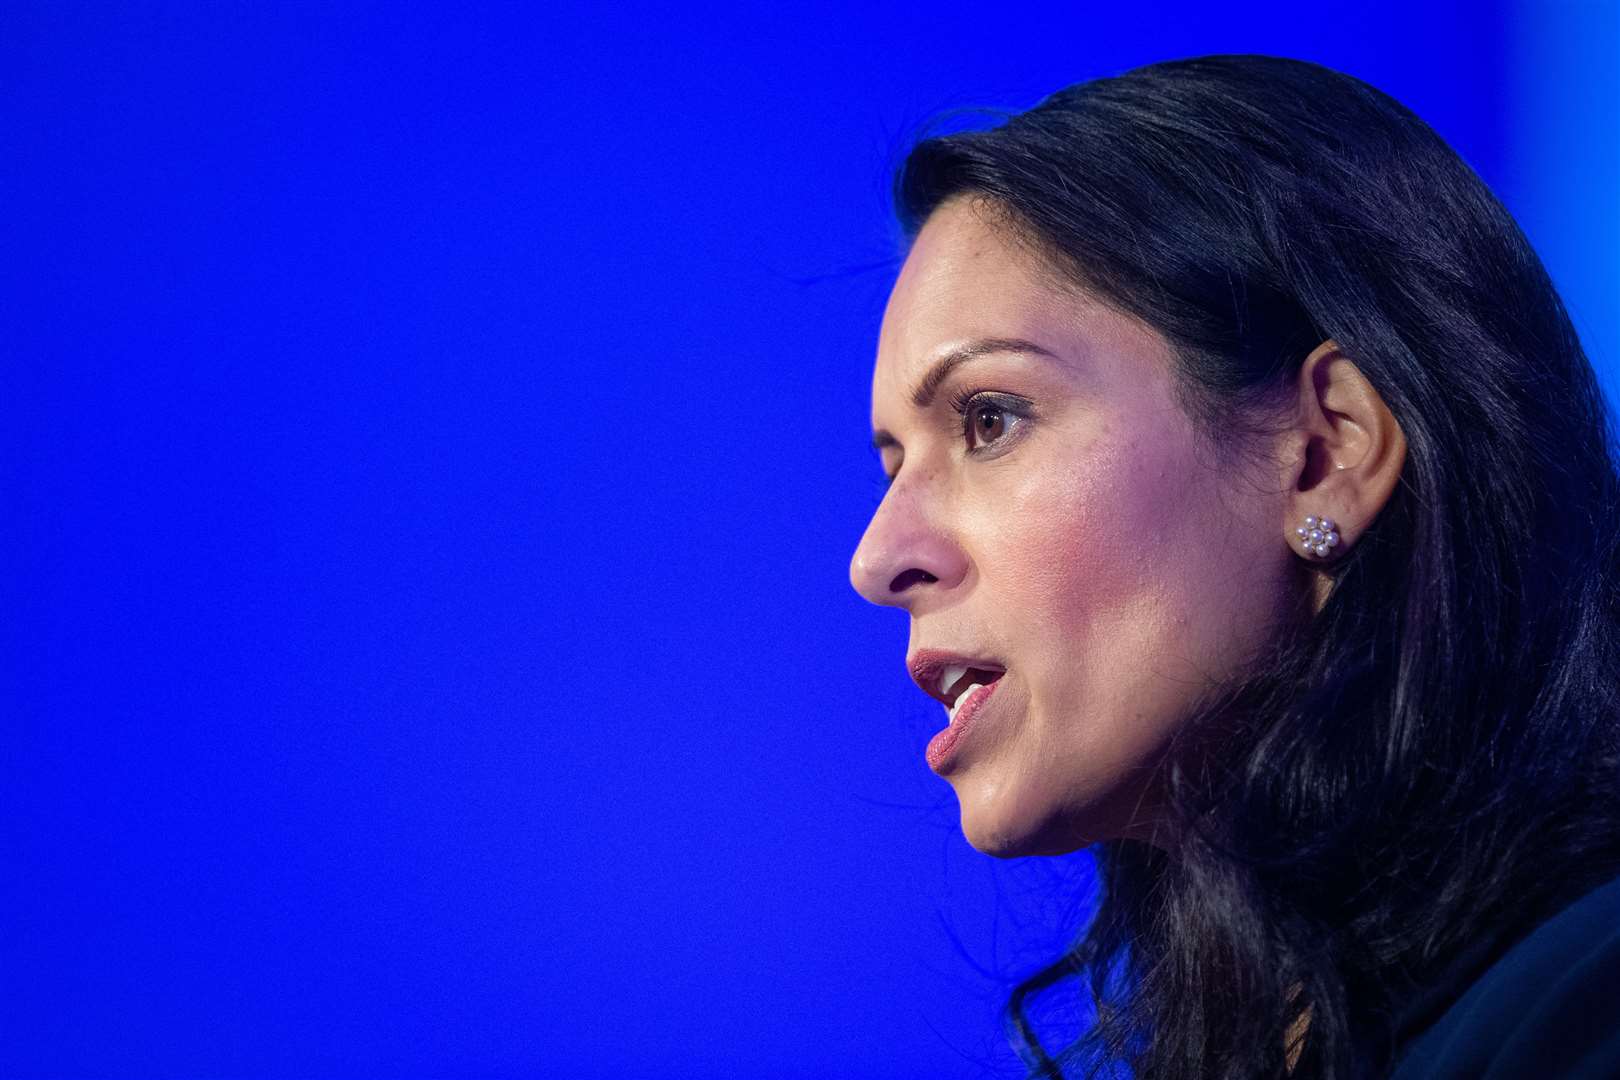 Priti Patel says the Home Office remains determined to return people ‘who have no right to be here’ (Dominic Lipinski/PA)